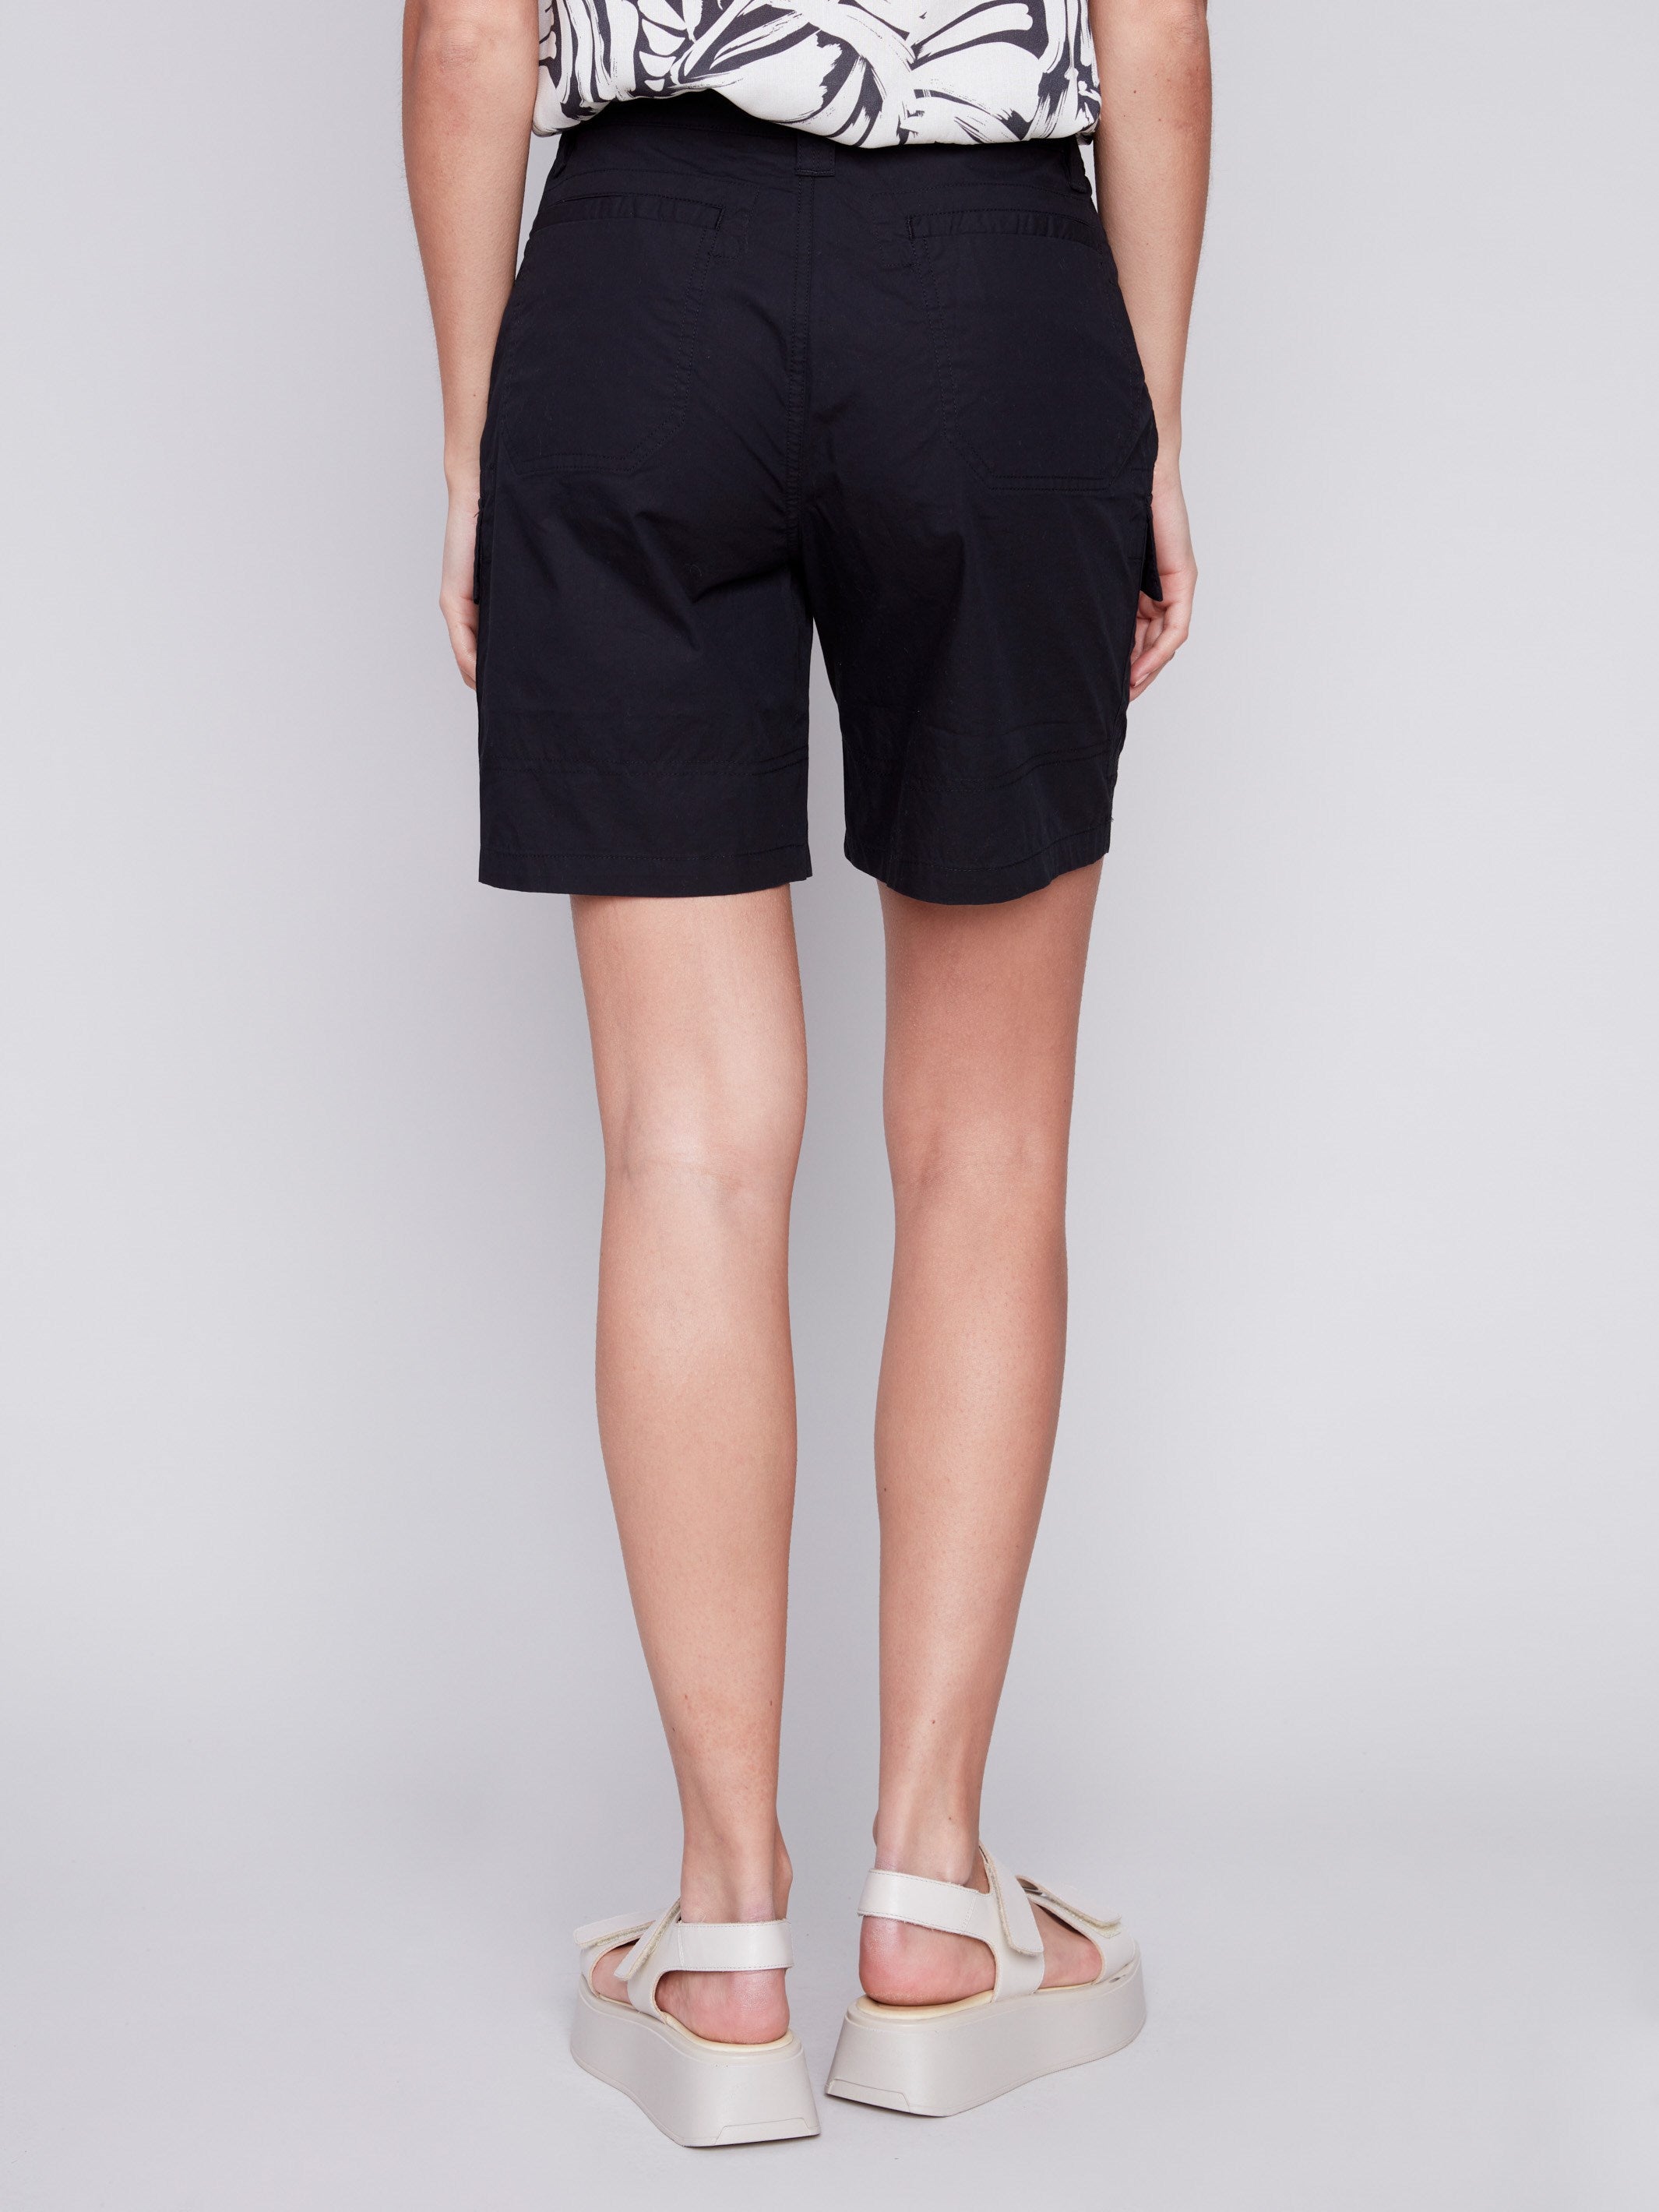 Cotton Shorts with Cargo Pockets - Black - Charlie B Collection Canada - Image 3